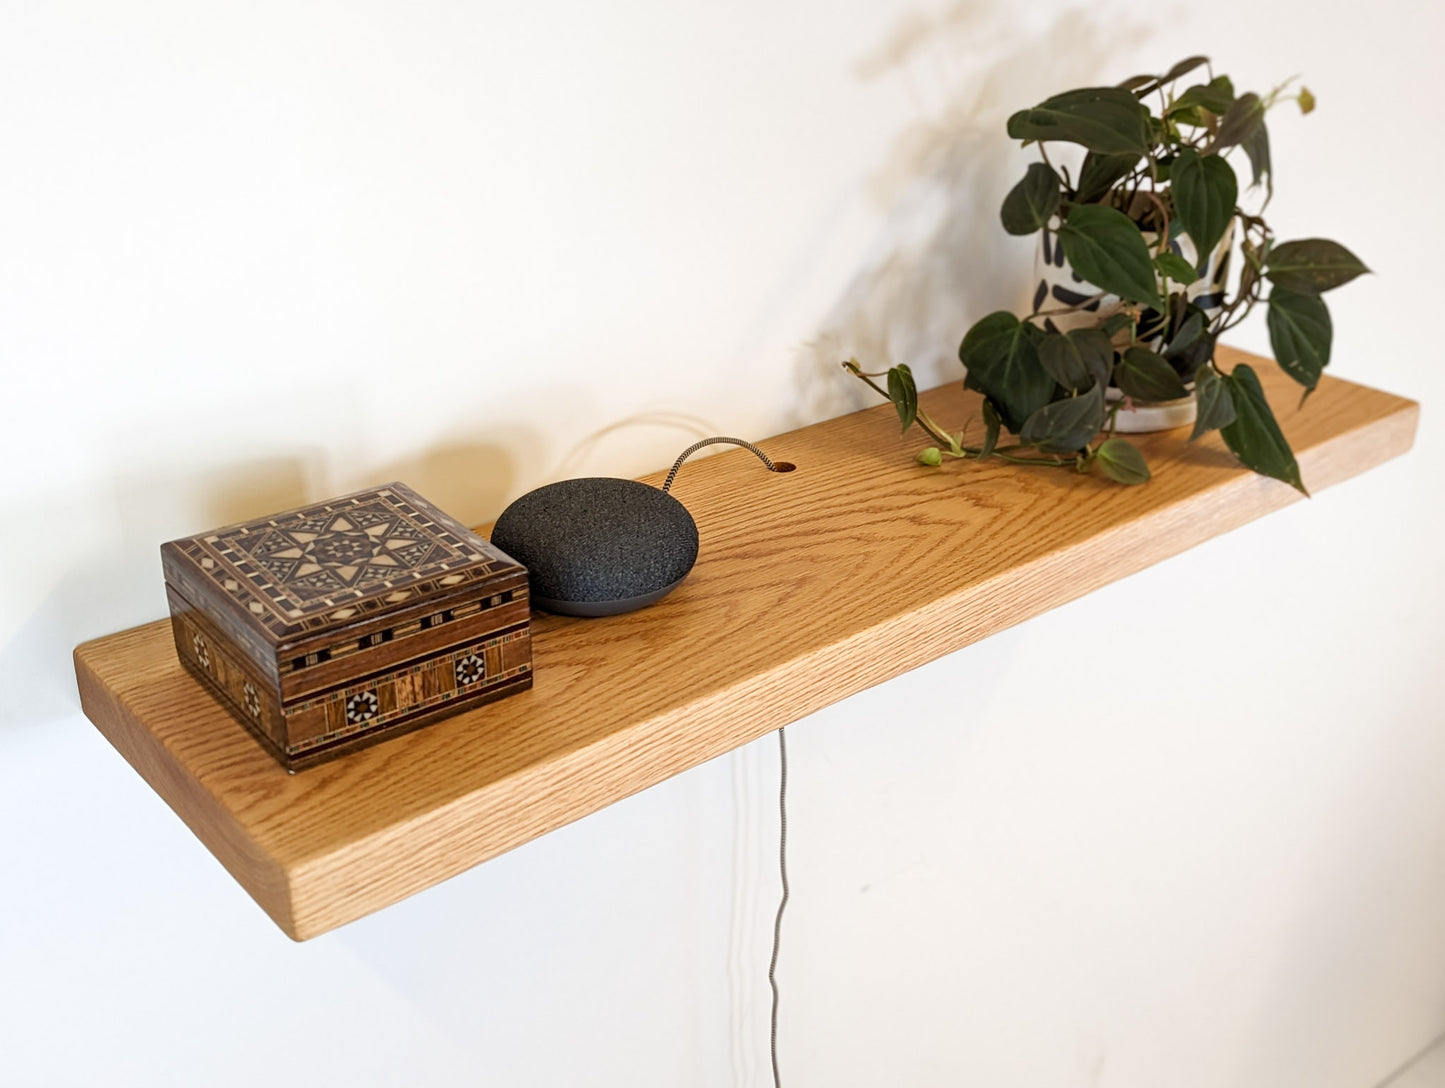 An oak shelf with a cord hole displays a box, speaker, and plant.